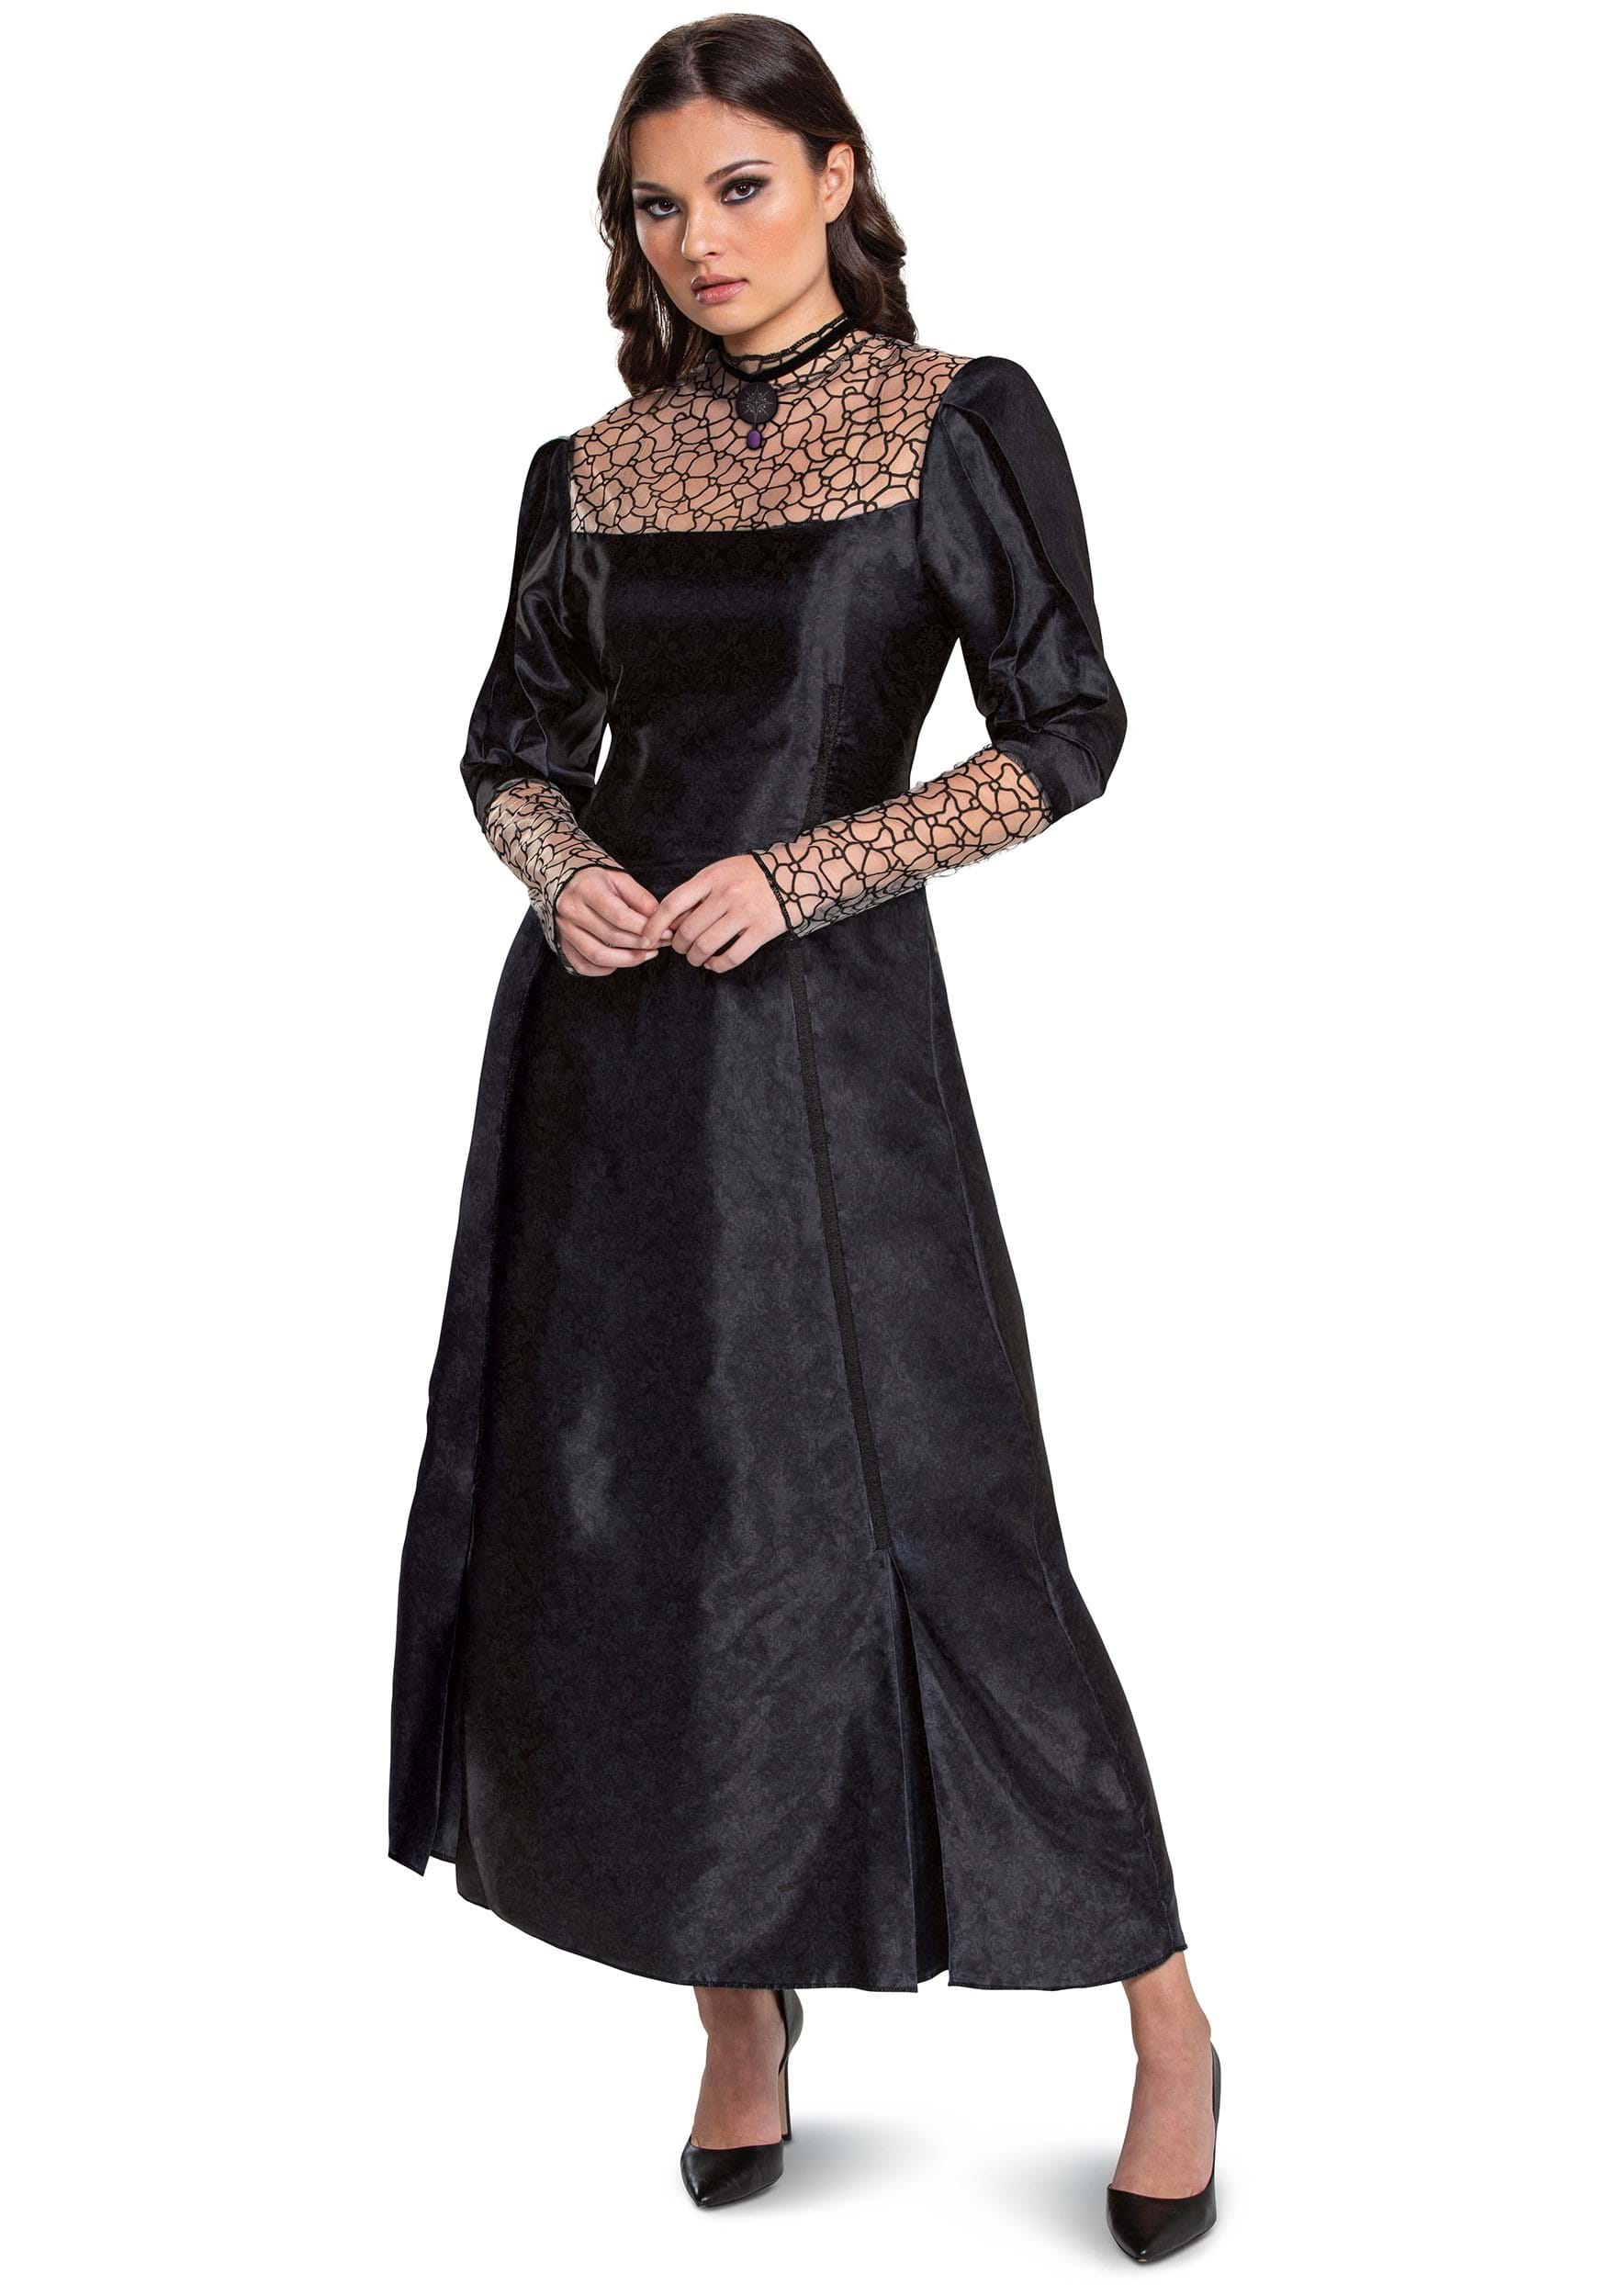 Image of Women's The Witcher Classic Yennefer Costume ID DI123819-S